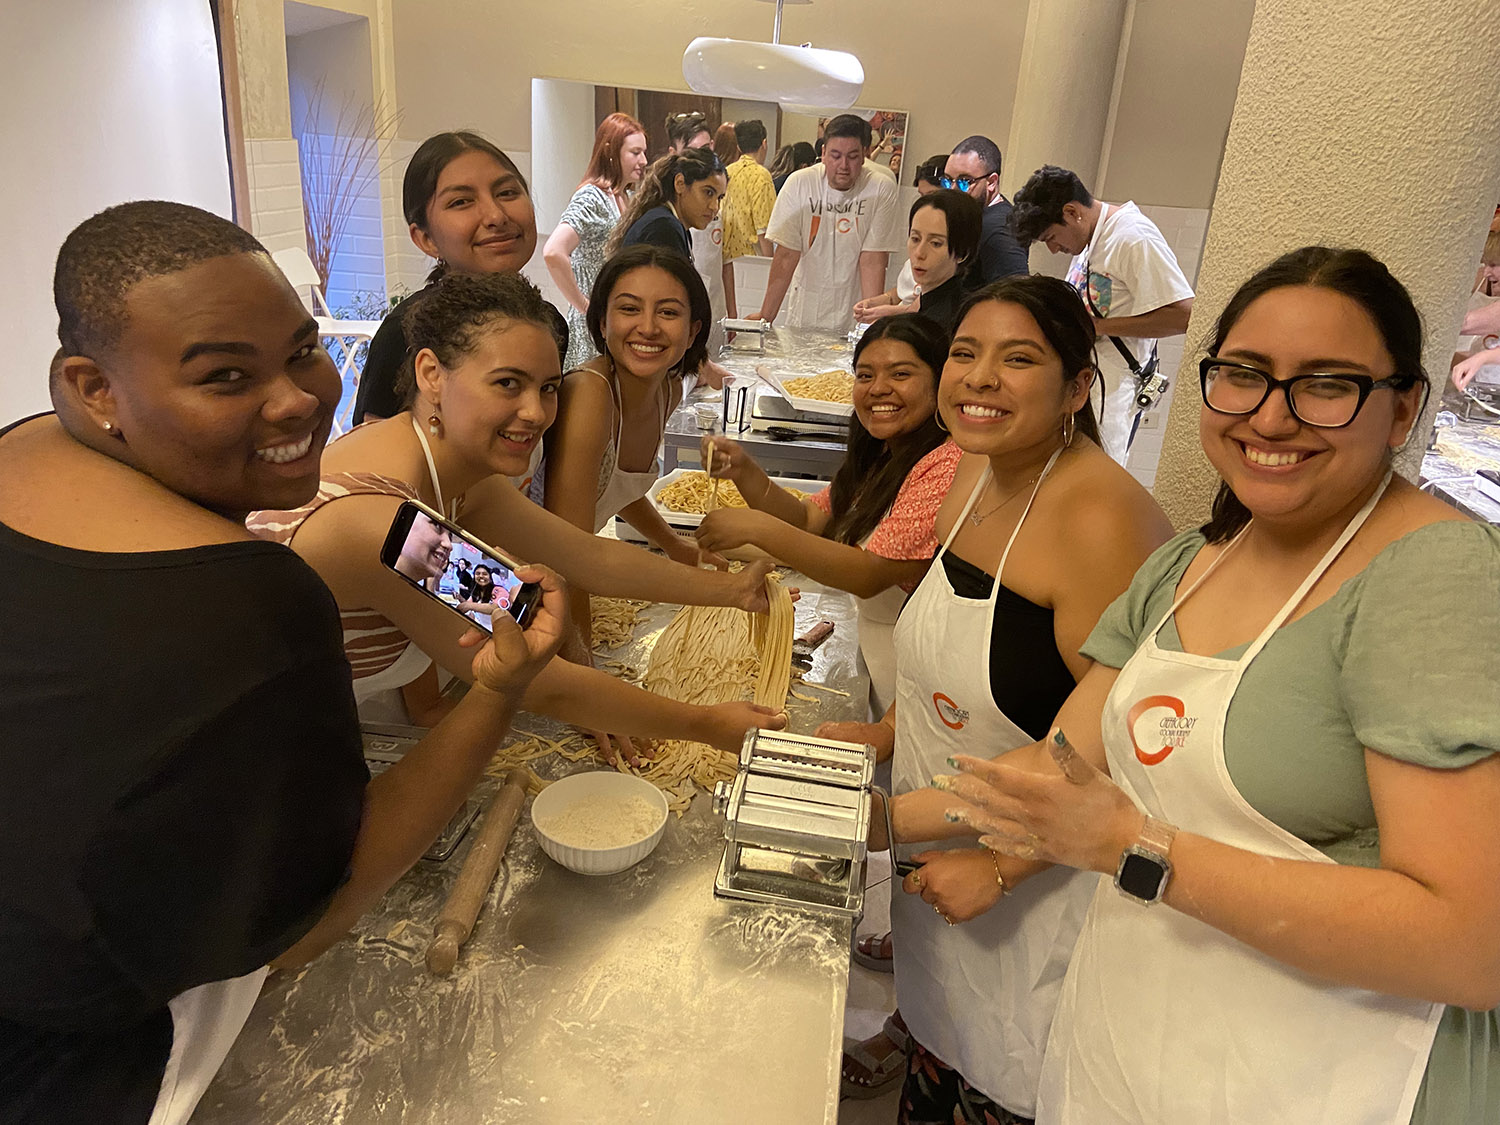 Students who took part in Mesa College’s Florence study abroad program got show off their pasta making skills during a cooking class.